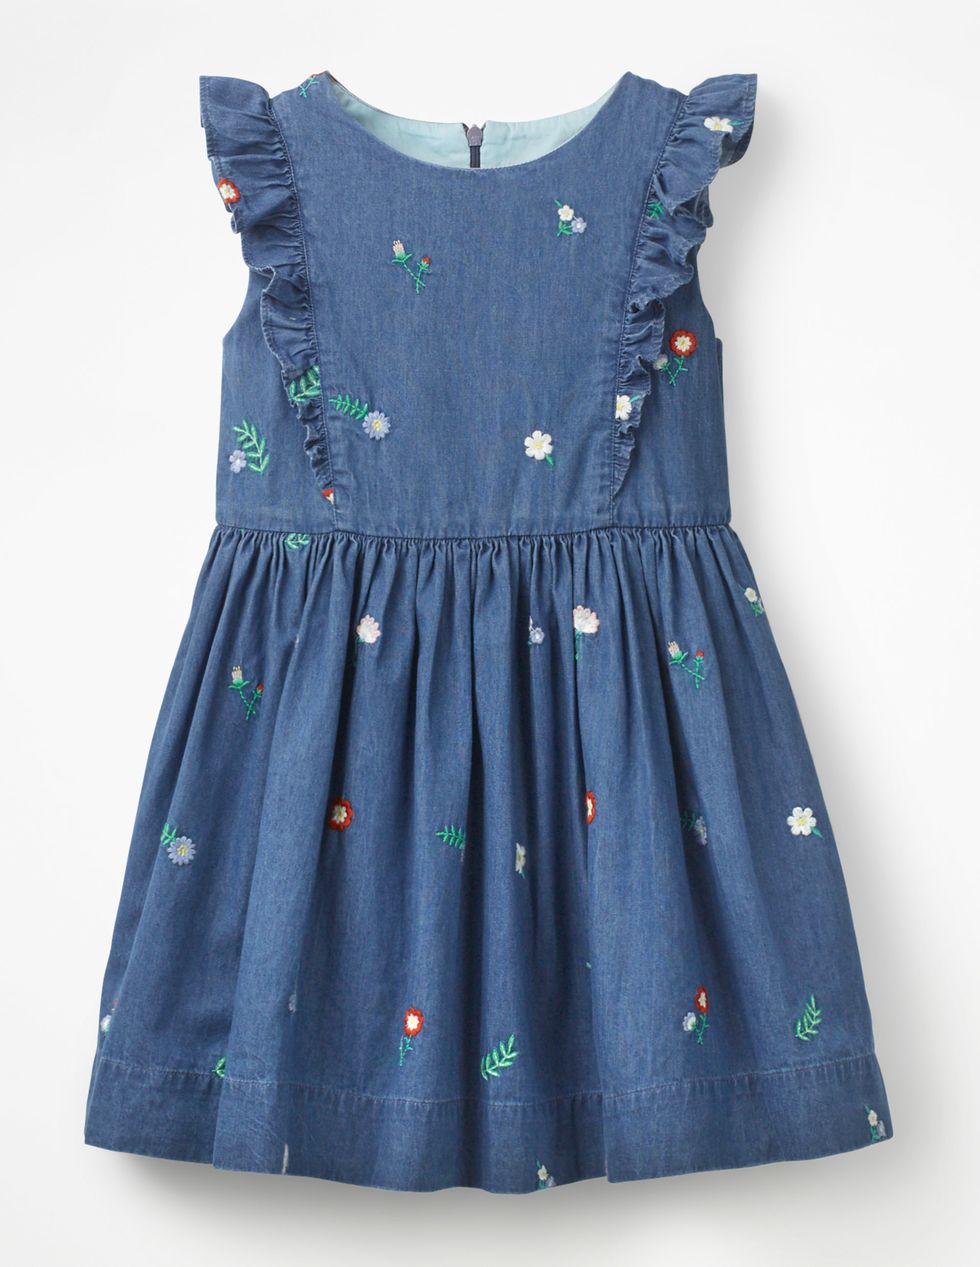 Mini Boden: You can save 60% on girls' summer dresses right now